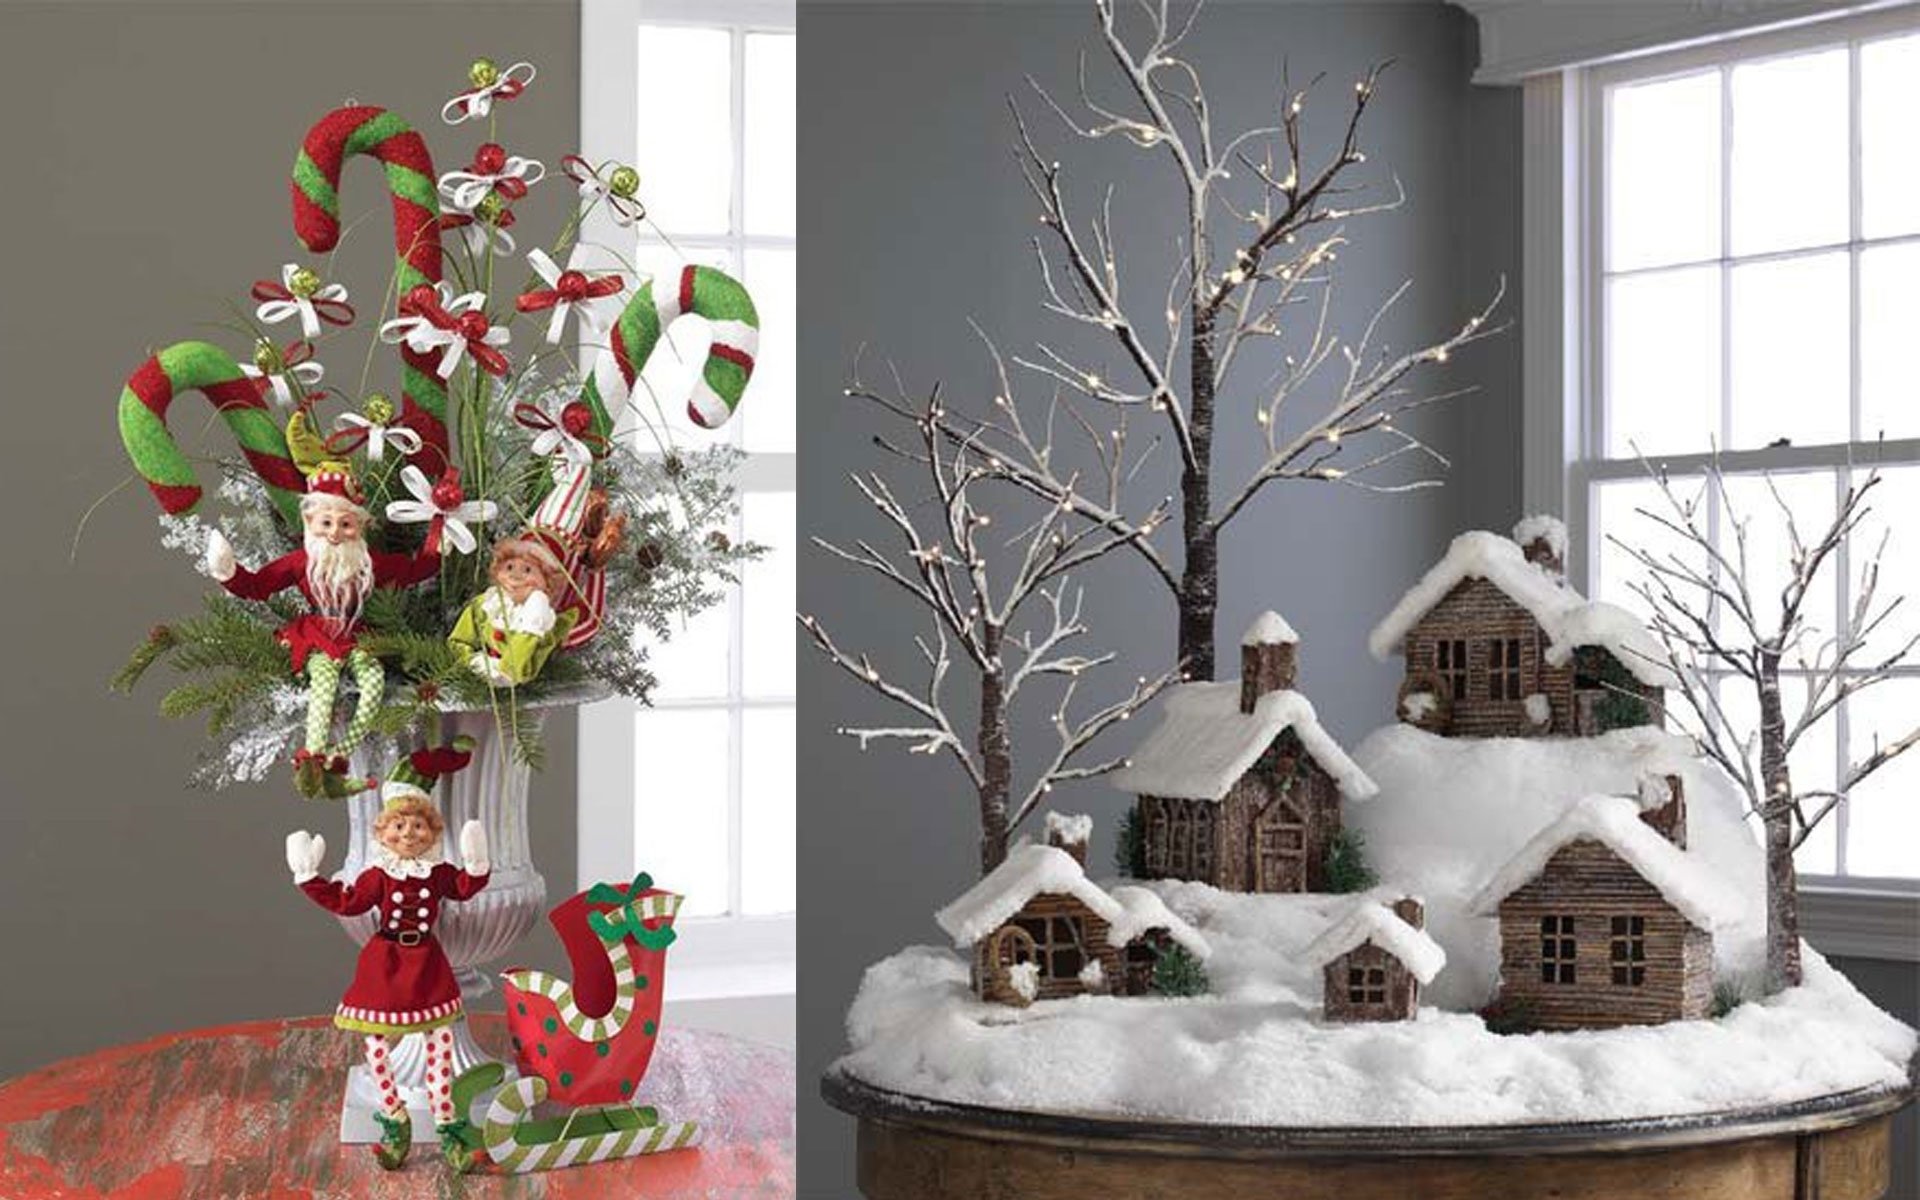 10 Perfect Decorating Ideas For Christmas 2013 christmas table decoration ideas iranews remarkable darkslategrey 2022